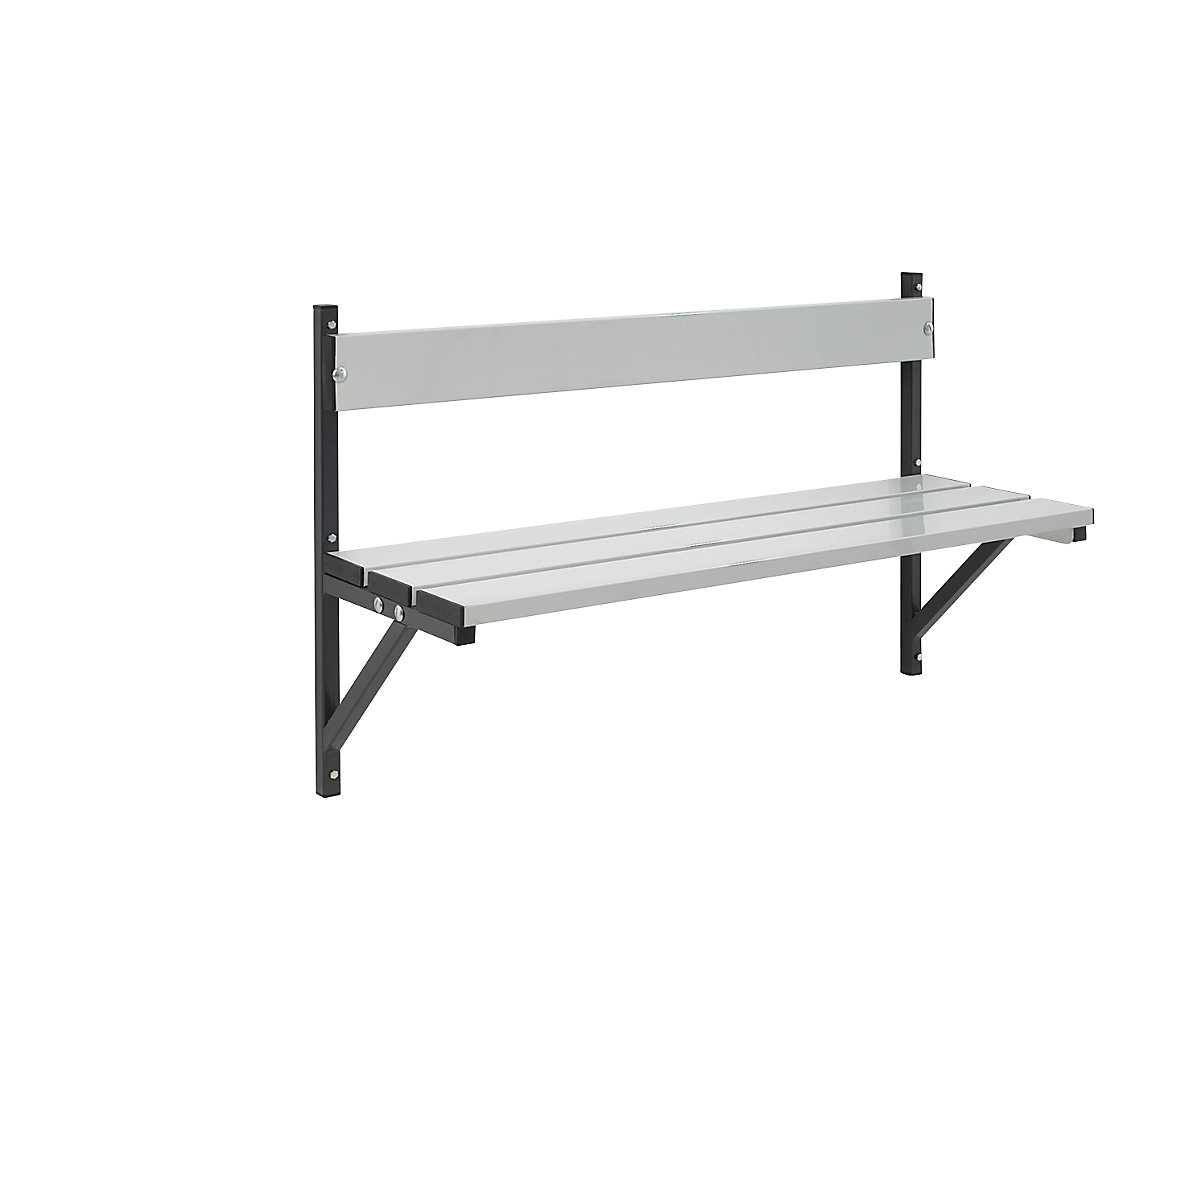 Sypro – Wall mounted bench, aluminium slats/stainless steel frame, length 1015 mm, charcoal